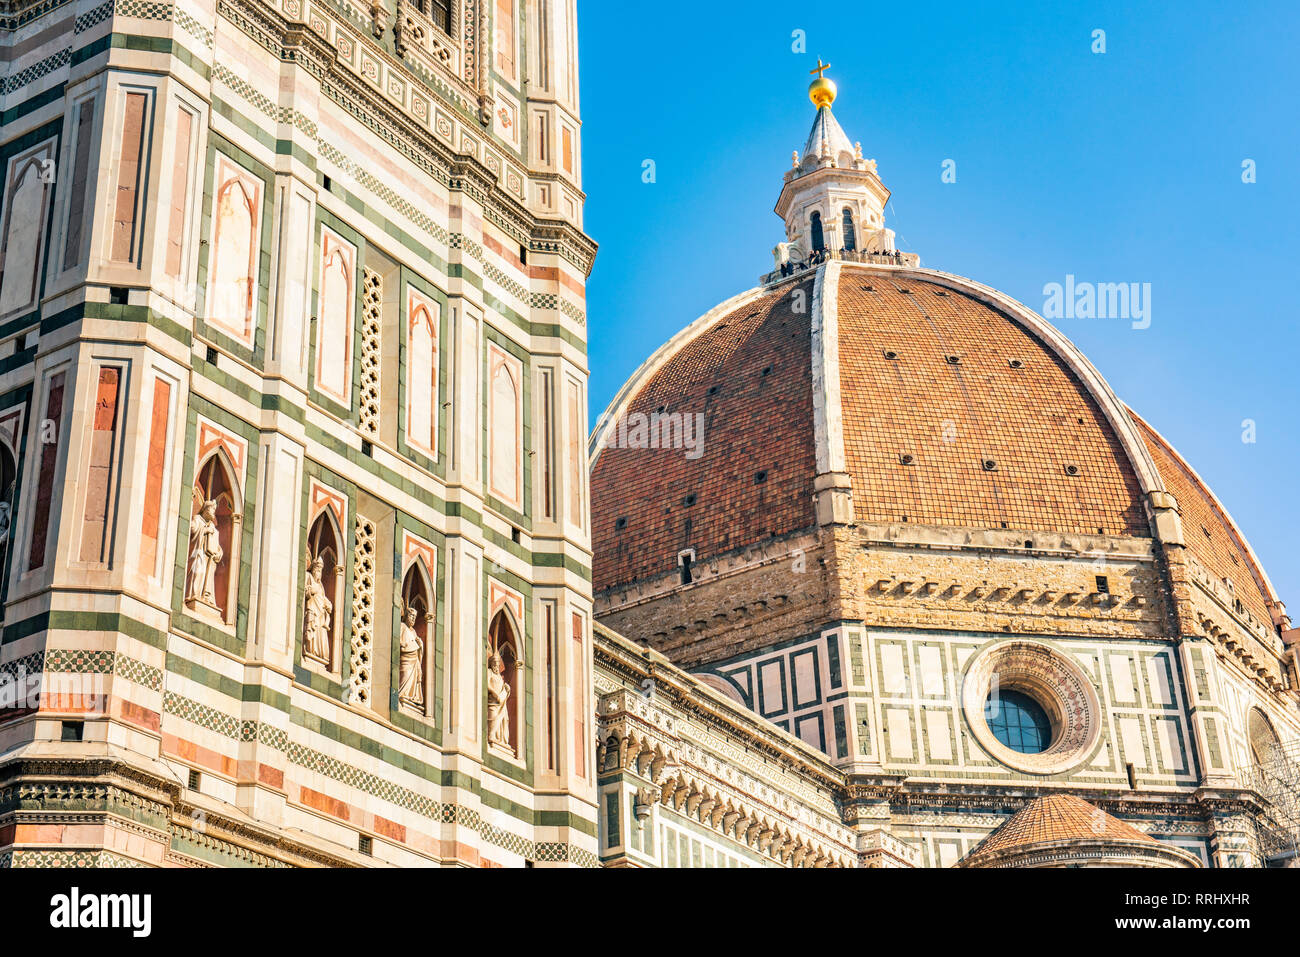 Florence Cathedral (Duomo), Piazza del Duomo, UNESCO World Heritage Site, Florence, Tuscany, Italy, Europe Stock Photo